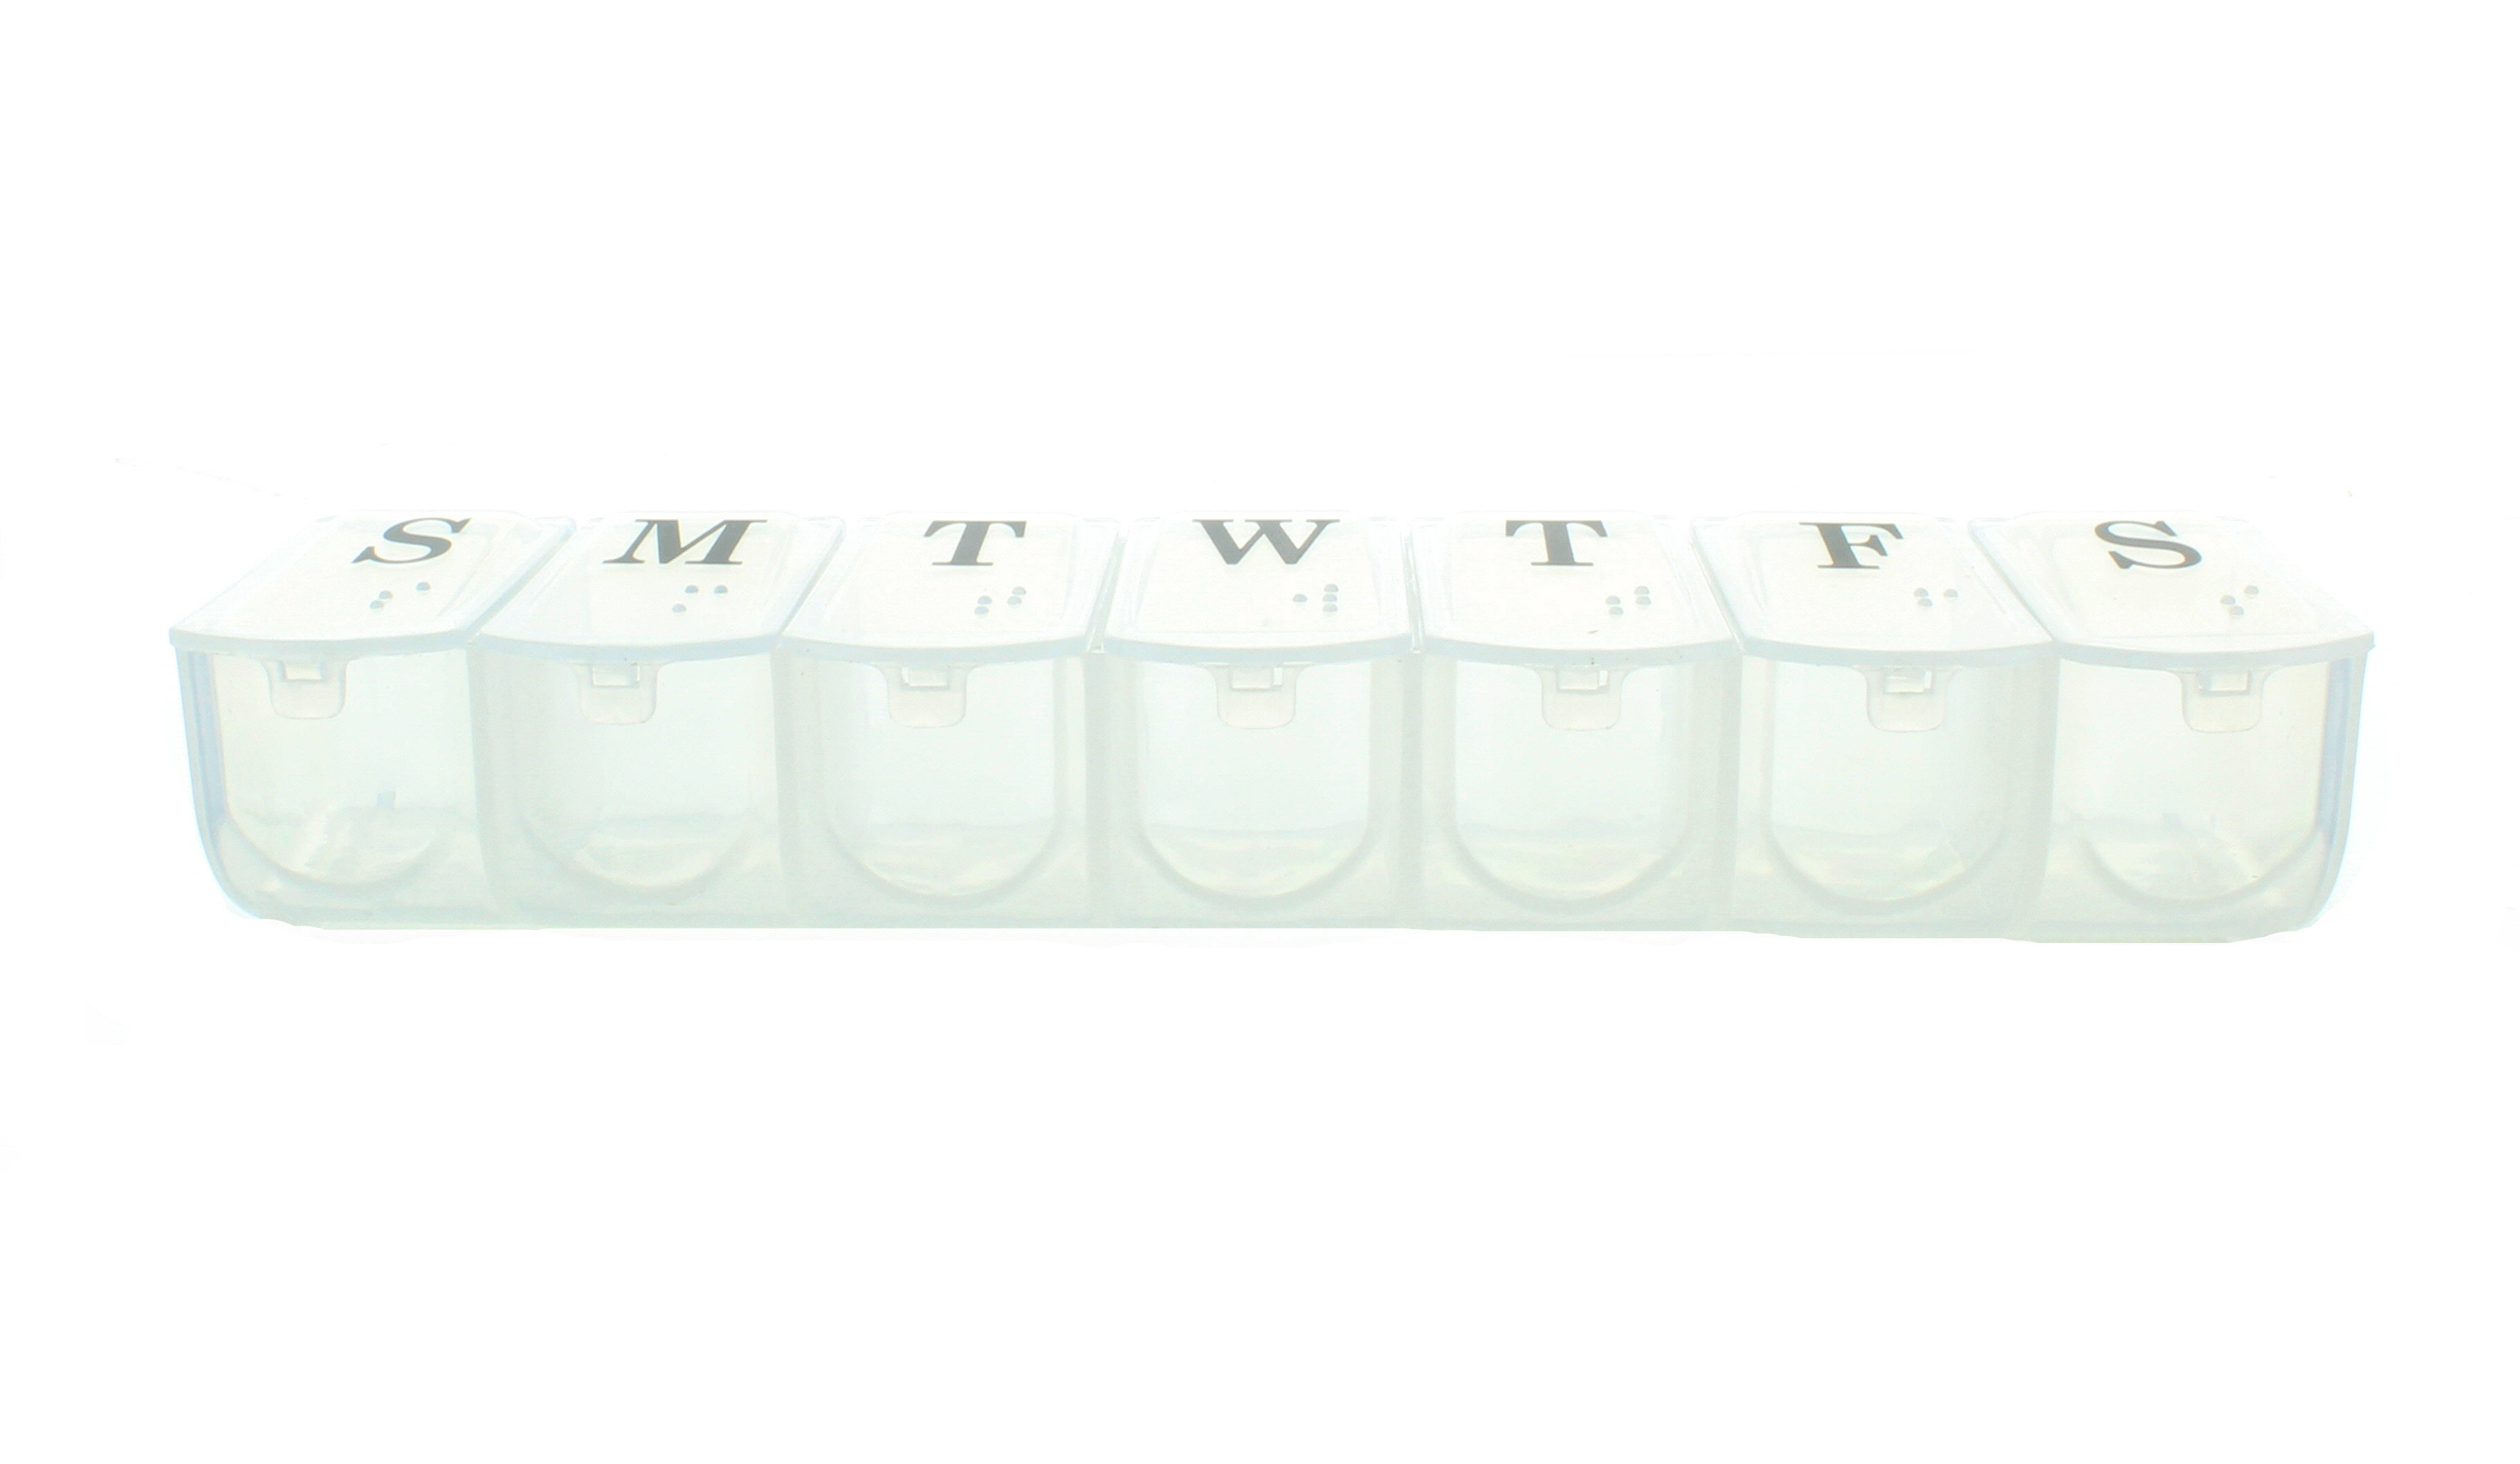 Living Concepts 7 Day Pill Box Case Daily Reminder Medication Organizer Storage